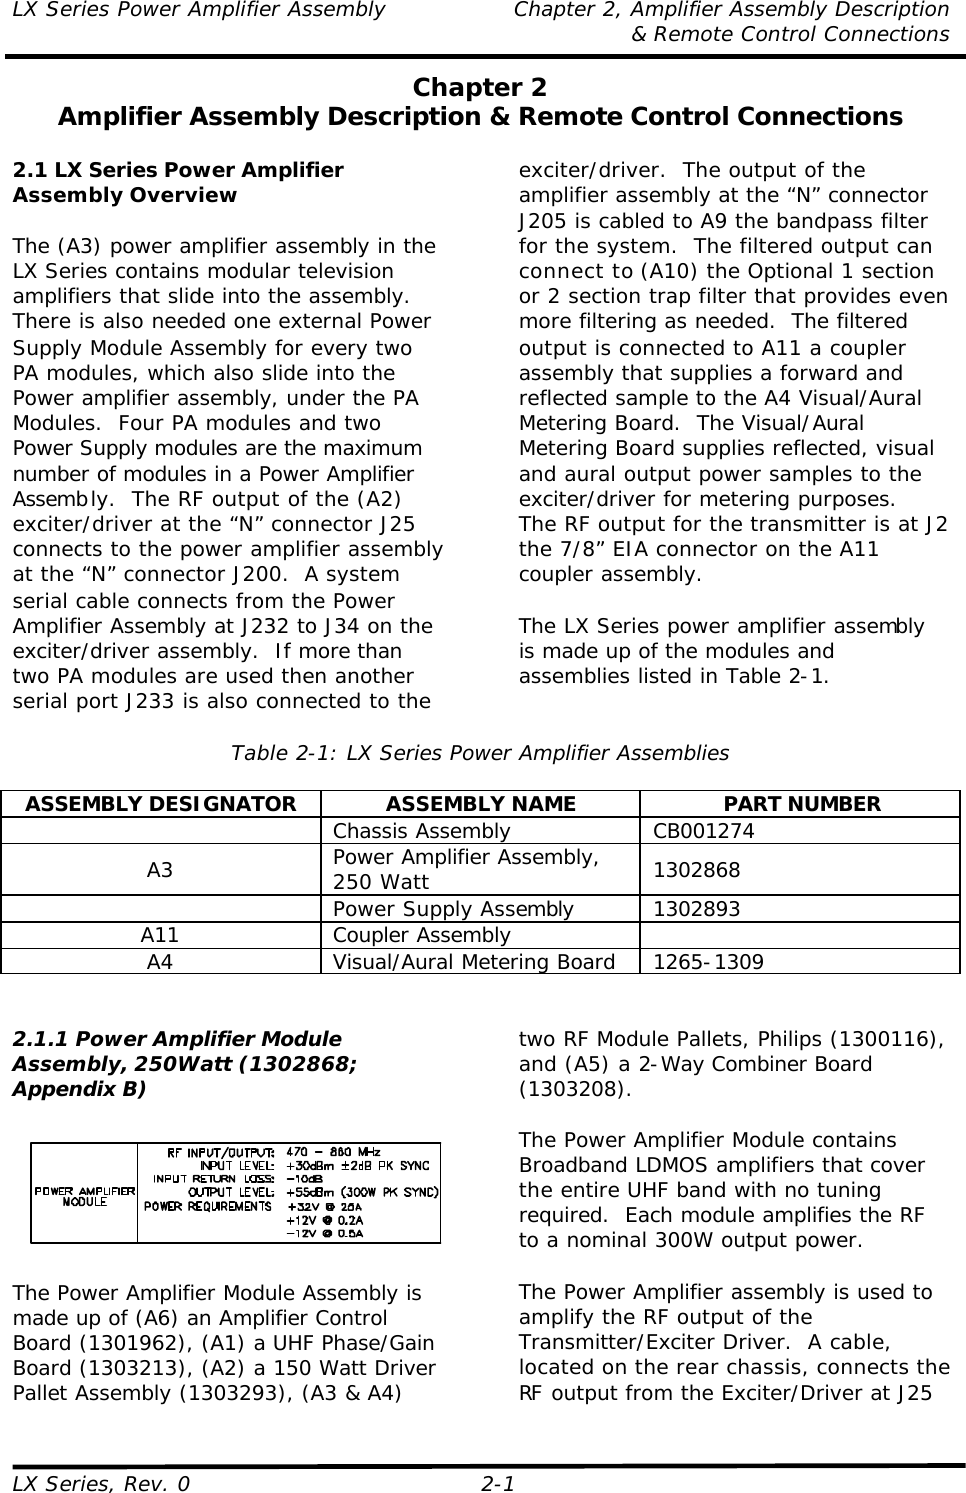 LX Series Power Amplifier Assembly Chapter 2, Amplifier Assembly Description  &amp; Remote Control Connections LX Series, Rev. 0 2-1 Chapter 2 Amplifier Assembly Description &amp; Remote Control Connections  2.1 LX Series Power Amplifier Assembly Overview  The (A3) power amplifier assembly in the LX Series contains modular television amplifiers that slide into the assembly.  There is also needed one external Power Supply Module Assembly for every two PA modules, which also slide into the Power amplifier assembly, under the PA Modules.  Four PA modules and two Power Supply modules are the maximum number of modules in a Power Amplifier Assembly.  The RF output of the (A2) exciter/driver at the “N” connector J25 connects to the power amplifier assembly at the “N” connector J200.  A system serial cable connects from the Power Amplifier Assembly at J232 to J34 on the exciter/driver assembly.  If more than two PA modules are used then another serial port J233 is also connected to the exciter/driver.  The output of the amplifier assembly at the “N” connector J205 is cabled to A9 the bandpass filter for the system.  The filtered output can connect to (A10) the Optional 1 section or 2 section trap filter that provides even more filtering as needed.  The filtered output is connected to A11 a coupler assembly that supplies a forward and reflected sample to the A4 Visual/Aural Metering Board.  The Visual/Aural Metering Board supplies reflected, visual and aural output power samples to the exciter/driver for metering purposes.  The RF output for the transmitter is at J2 the 7/8” EIA connector on the A11 coupler assembly.  The LX Series power amplifier assembly is made up of the modules and assemblies listed in Table 2-1.  Table 2-1: LX Series Power Amplifier Assemblies  ASSEMBLY DESIGNATOR ASSEMBLY NAME PART NUMBER  Chassis Assembly CB001274 A3 Power Amplifier Assembly, 250 Watt 1302868  Power Supply Assembly 1302893 A11 Coupler Assembly   A4 Visual/Aural Metering Board 1265-1309   2.1.1 Power Amplifier Module Assembly, 250Watt (1302868; Appendix B)    The Power Amplifier Module Assembly is made up of (A6) an Amplifier Control Board (1301962), (A1) a UHF Phase/Gain Board (1303213), (A2) a 150 Watt Driver Pallet Assembly (1303293), (A3 &amp; A4) two RF Module Pallets, Philips (1300116), and (A5) a 2-Way Combiner Board (1303208).  The Power Amplifier Module contains Broadband LDMOS amplifiers that cover the entire UHF band with no tuning required.  Each module amplifies the RF to a nominal 300W output power.  The Power Amplifier assembly is used to amplify the RF output of the Transmitter/Exciter Driver.  A cable, located on the rear chassis, connects the RF output from the Exciter/Driver at J25 